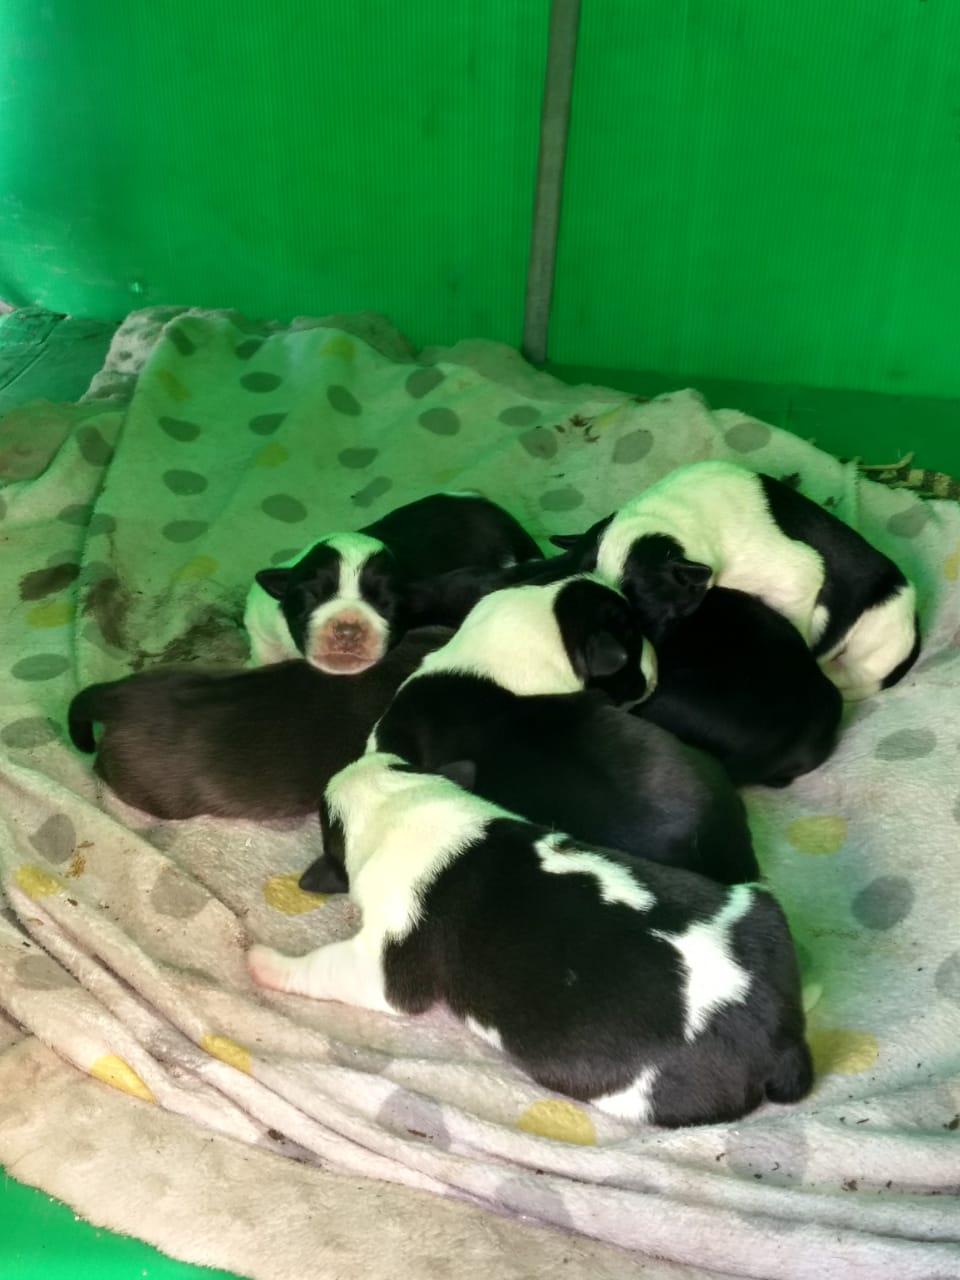 ABANDONED IN A CARDBOARD BOX NEXT TO A DUMPSTER. OIPA TUNISIE SAVES A LITTER OF SIX PUPPIES